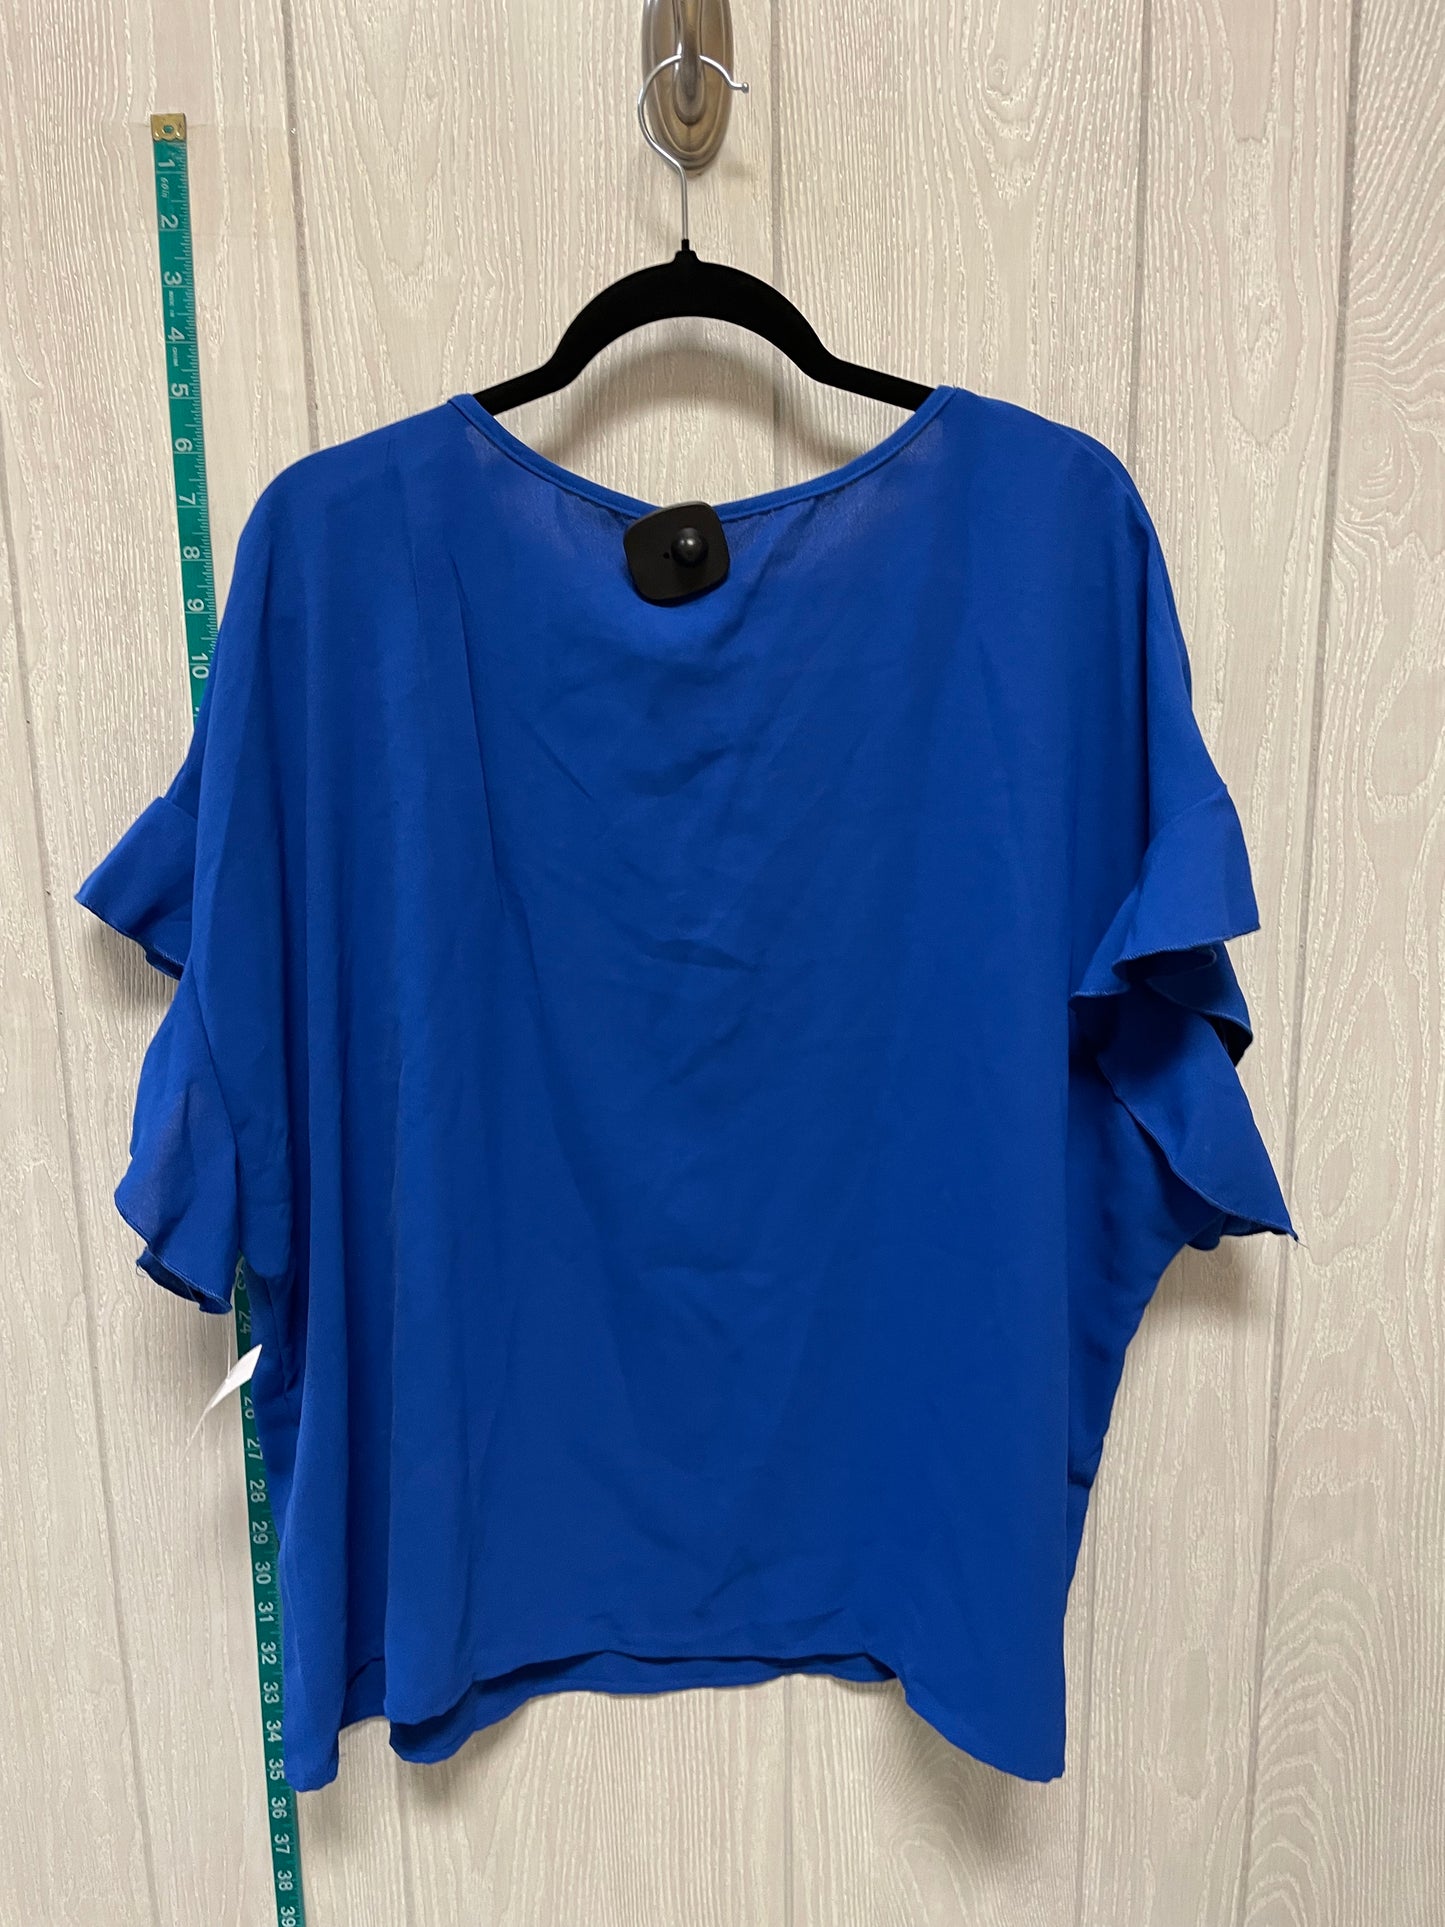 Blouse Short Sleeve By Emery Rose  Size: 3x